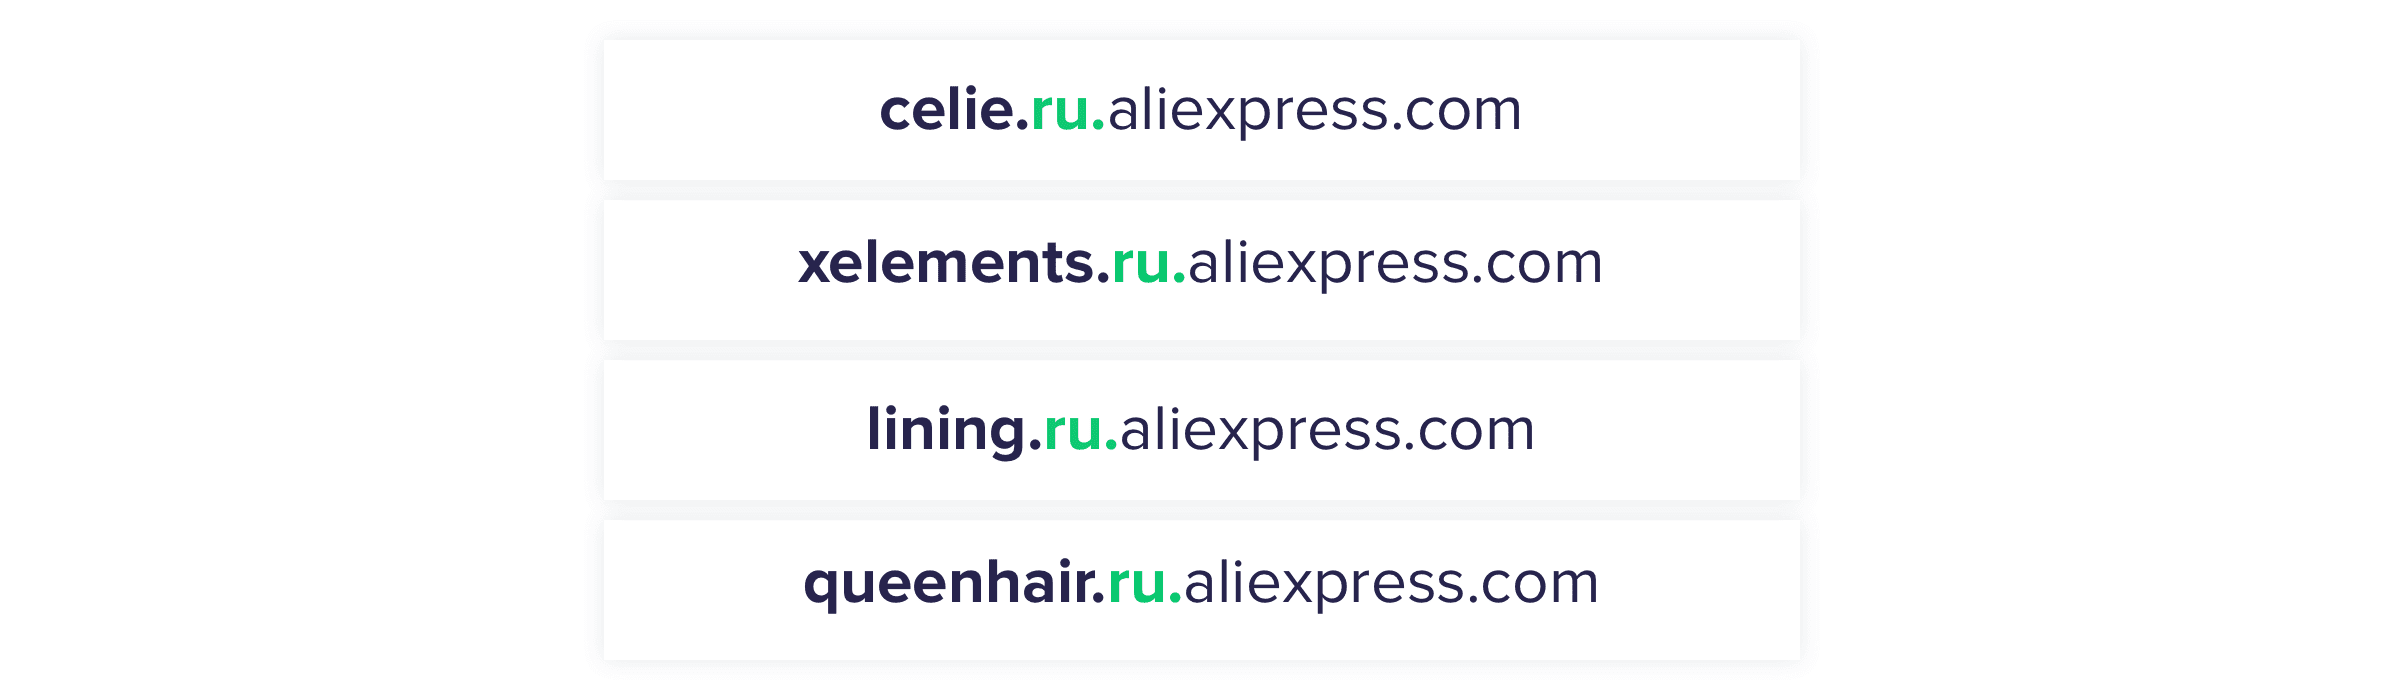 AliExpress regional and category subdomains 